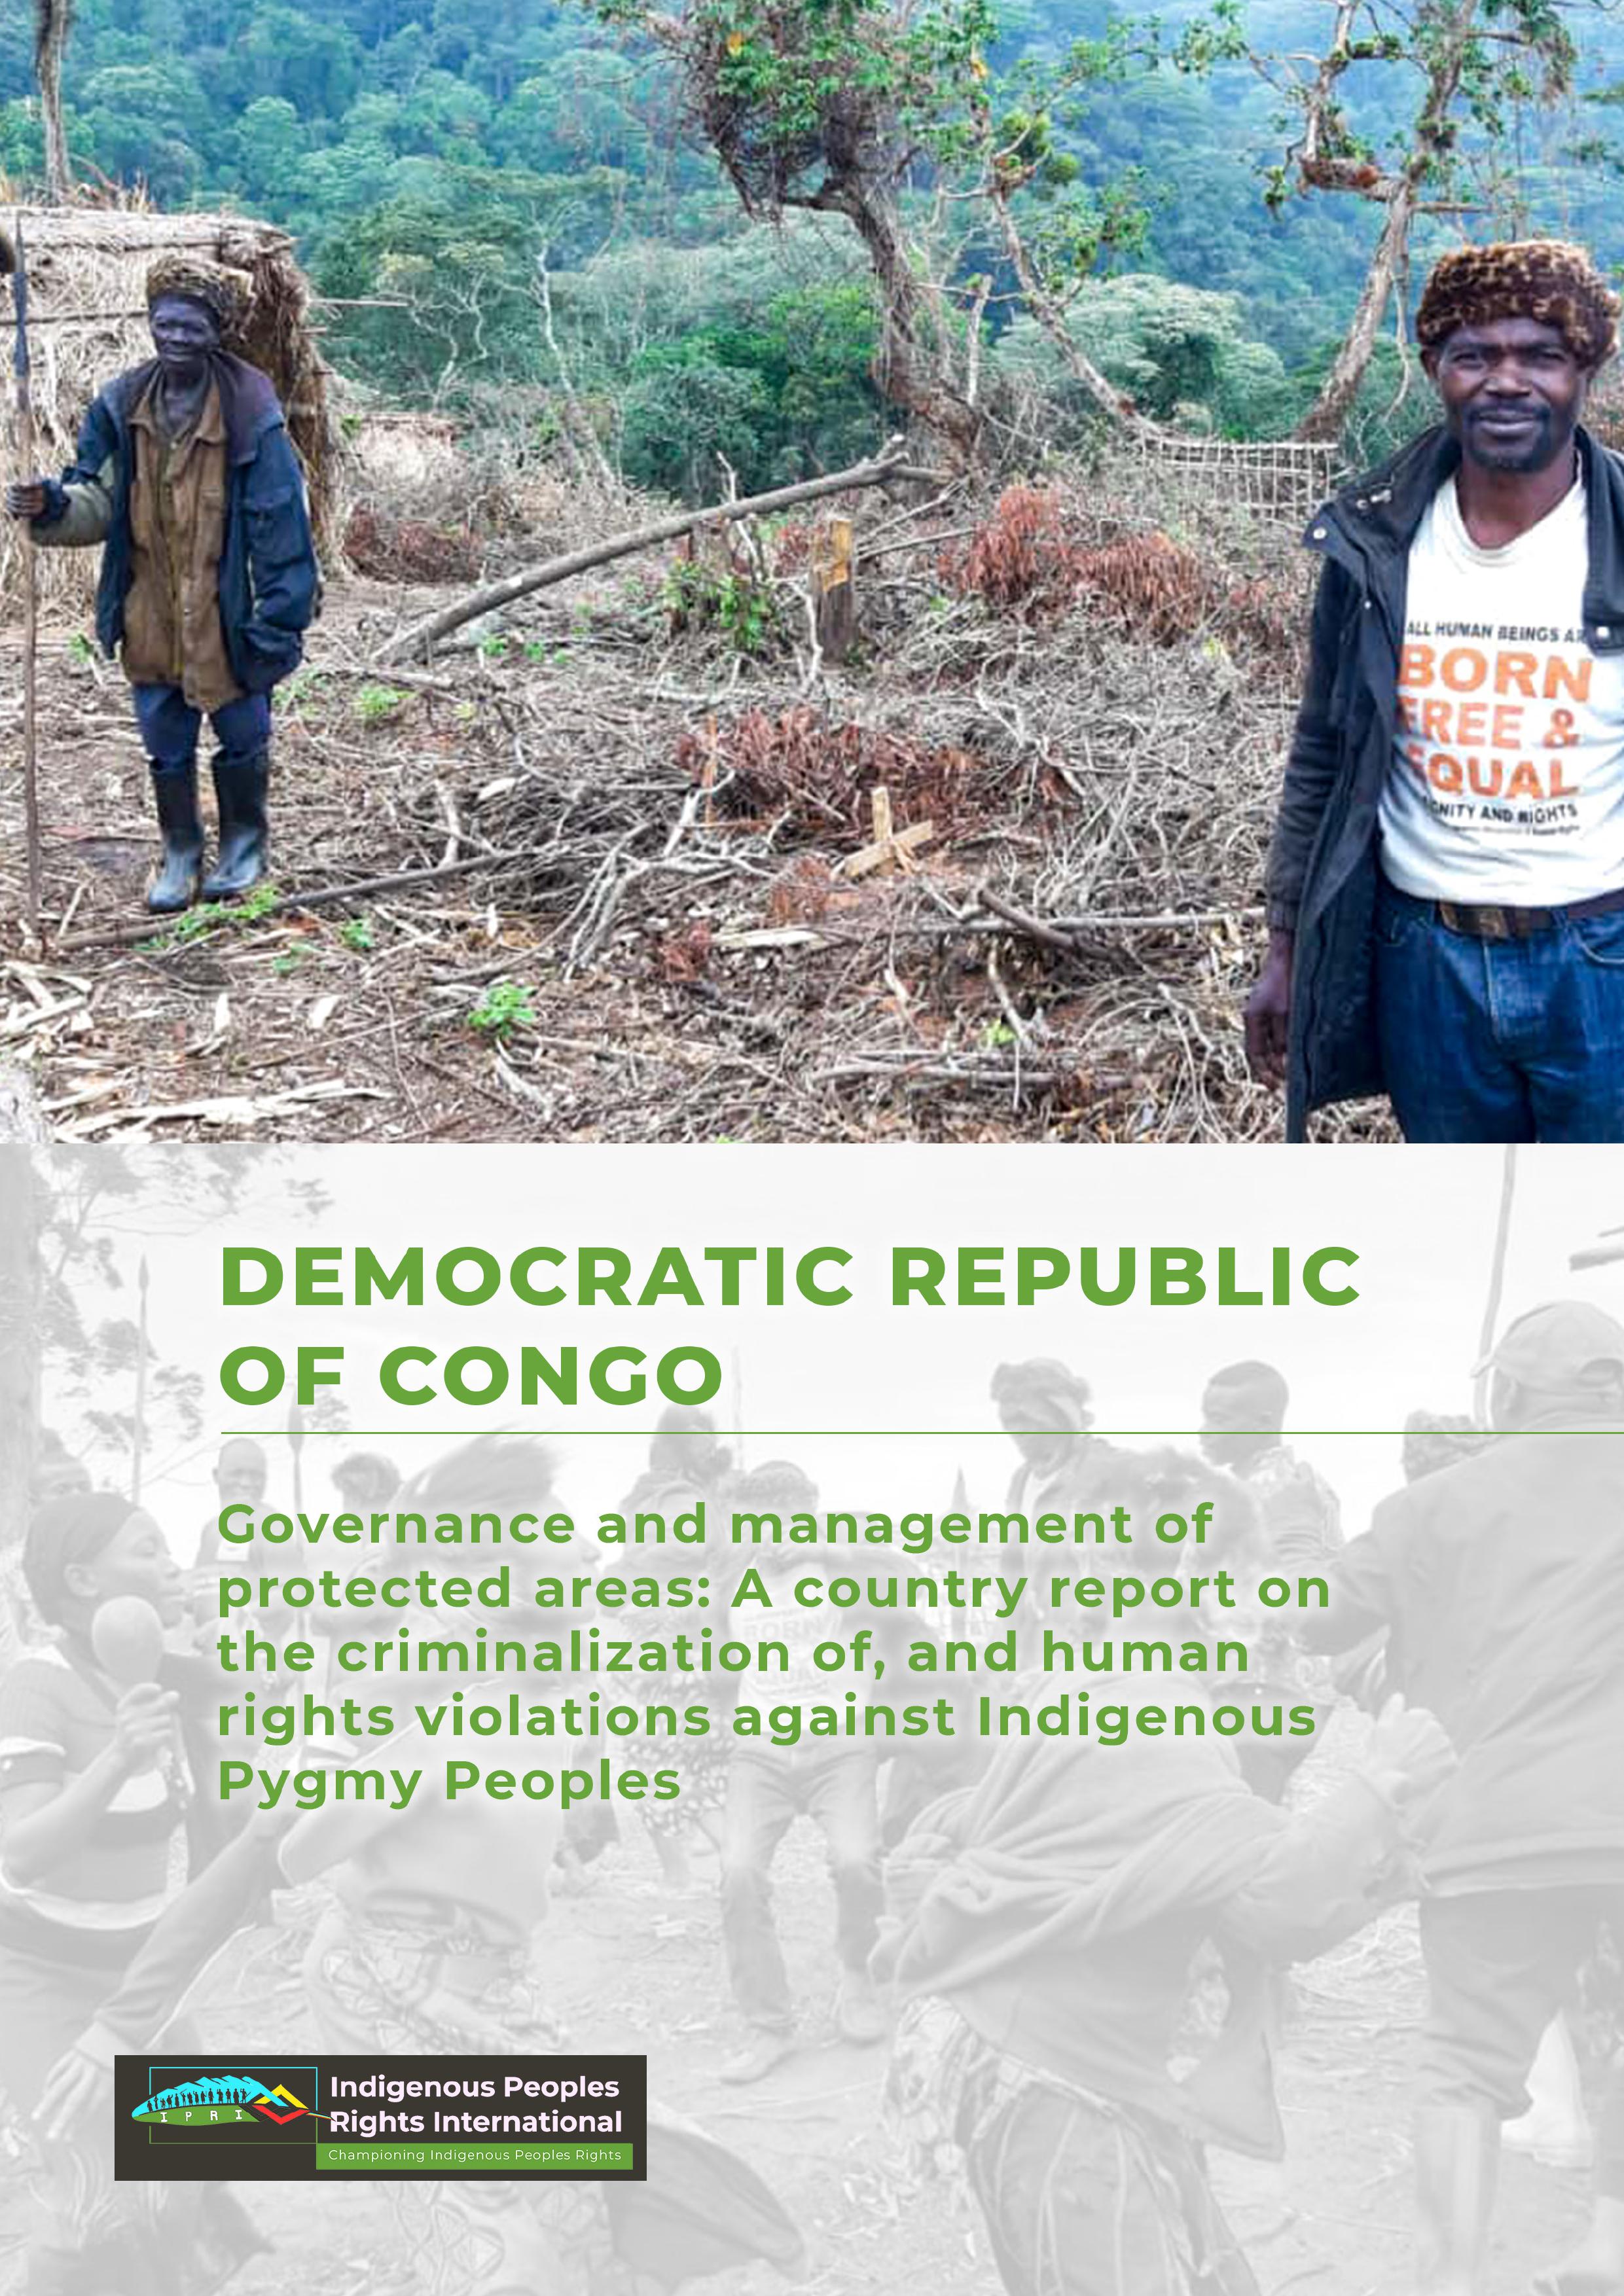 DRC || Governance and management of protected areas: A country report on the criminalization of, and human rights violations against Indigenous Pygmy Peoples